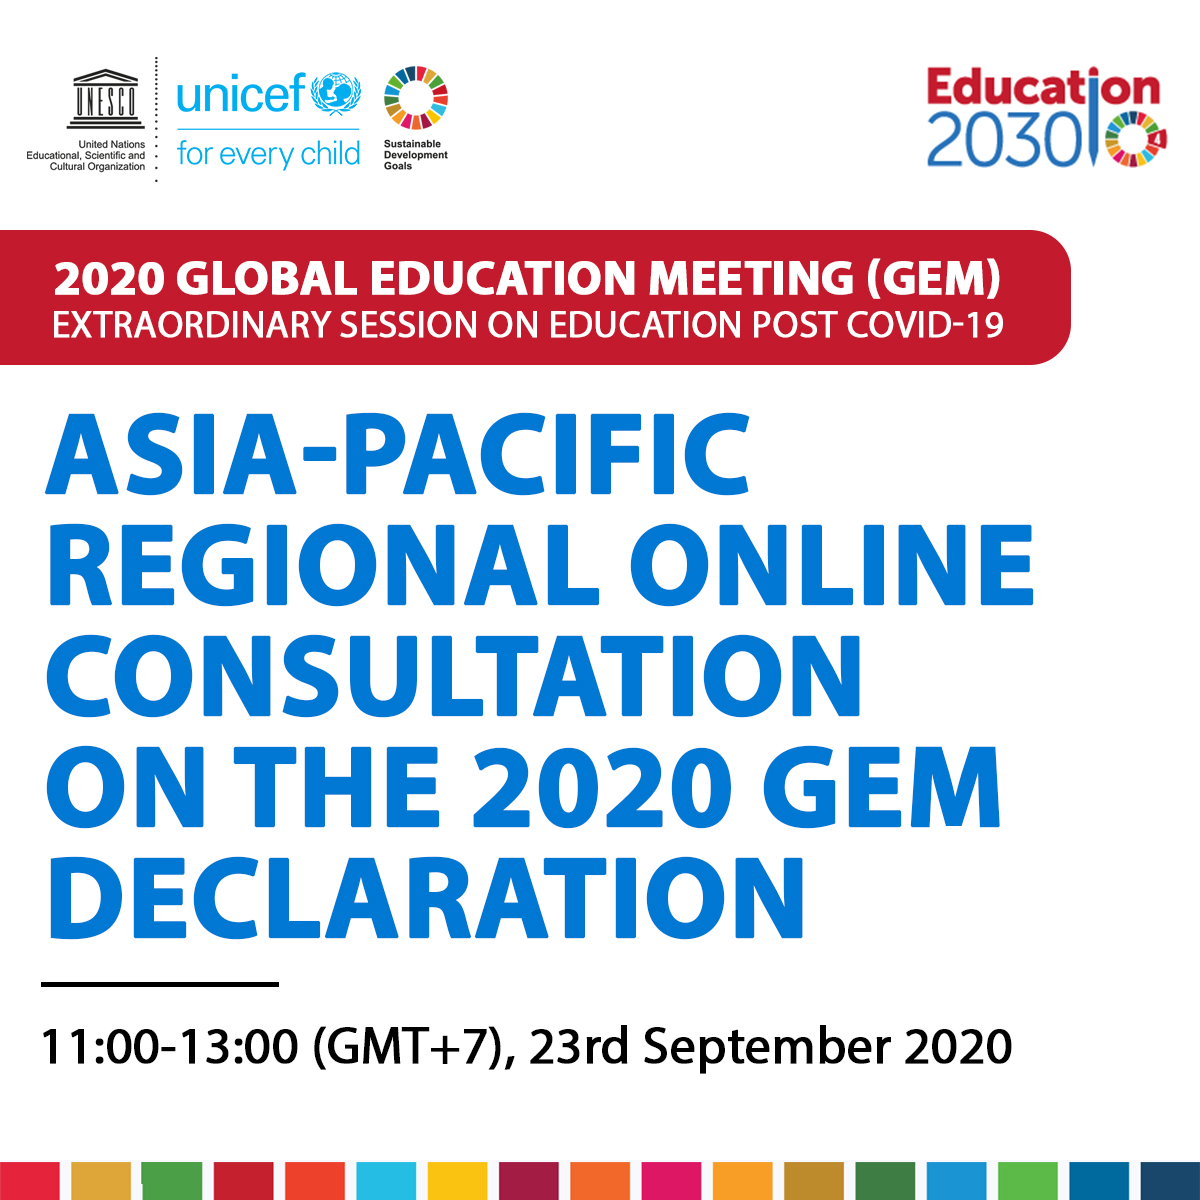 Asia-Pacific Regional Online Consultation on the 2020 Global Education Meeting (GEM) Declaration